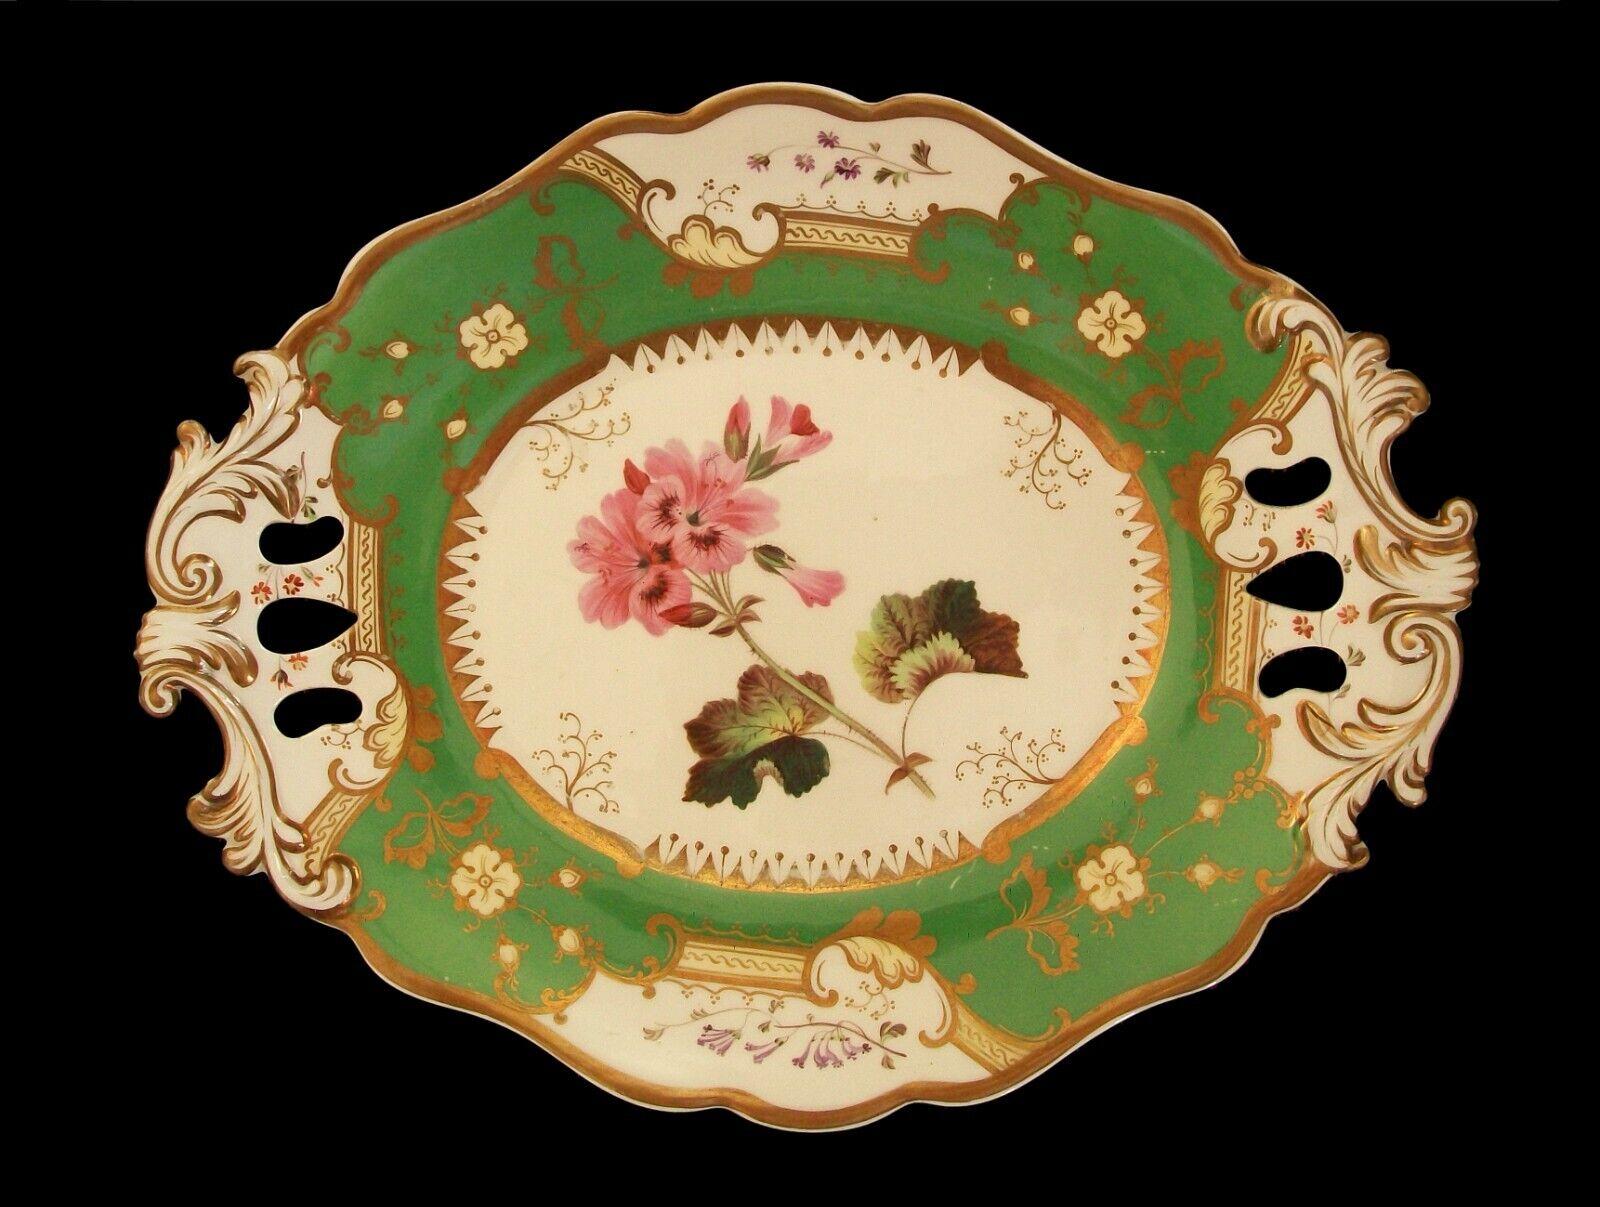 COALPORT (Attributed) - 'Geranium' - Antique ceramic twin handled botanical serving platter with apple green borders and gilded decoration - featuring a hand painted floral specimen to the center - pattern number to the back - unsigned - United